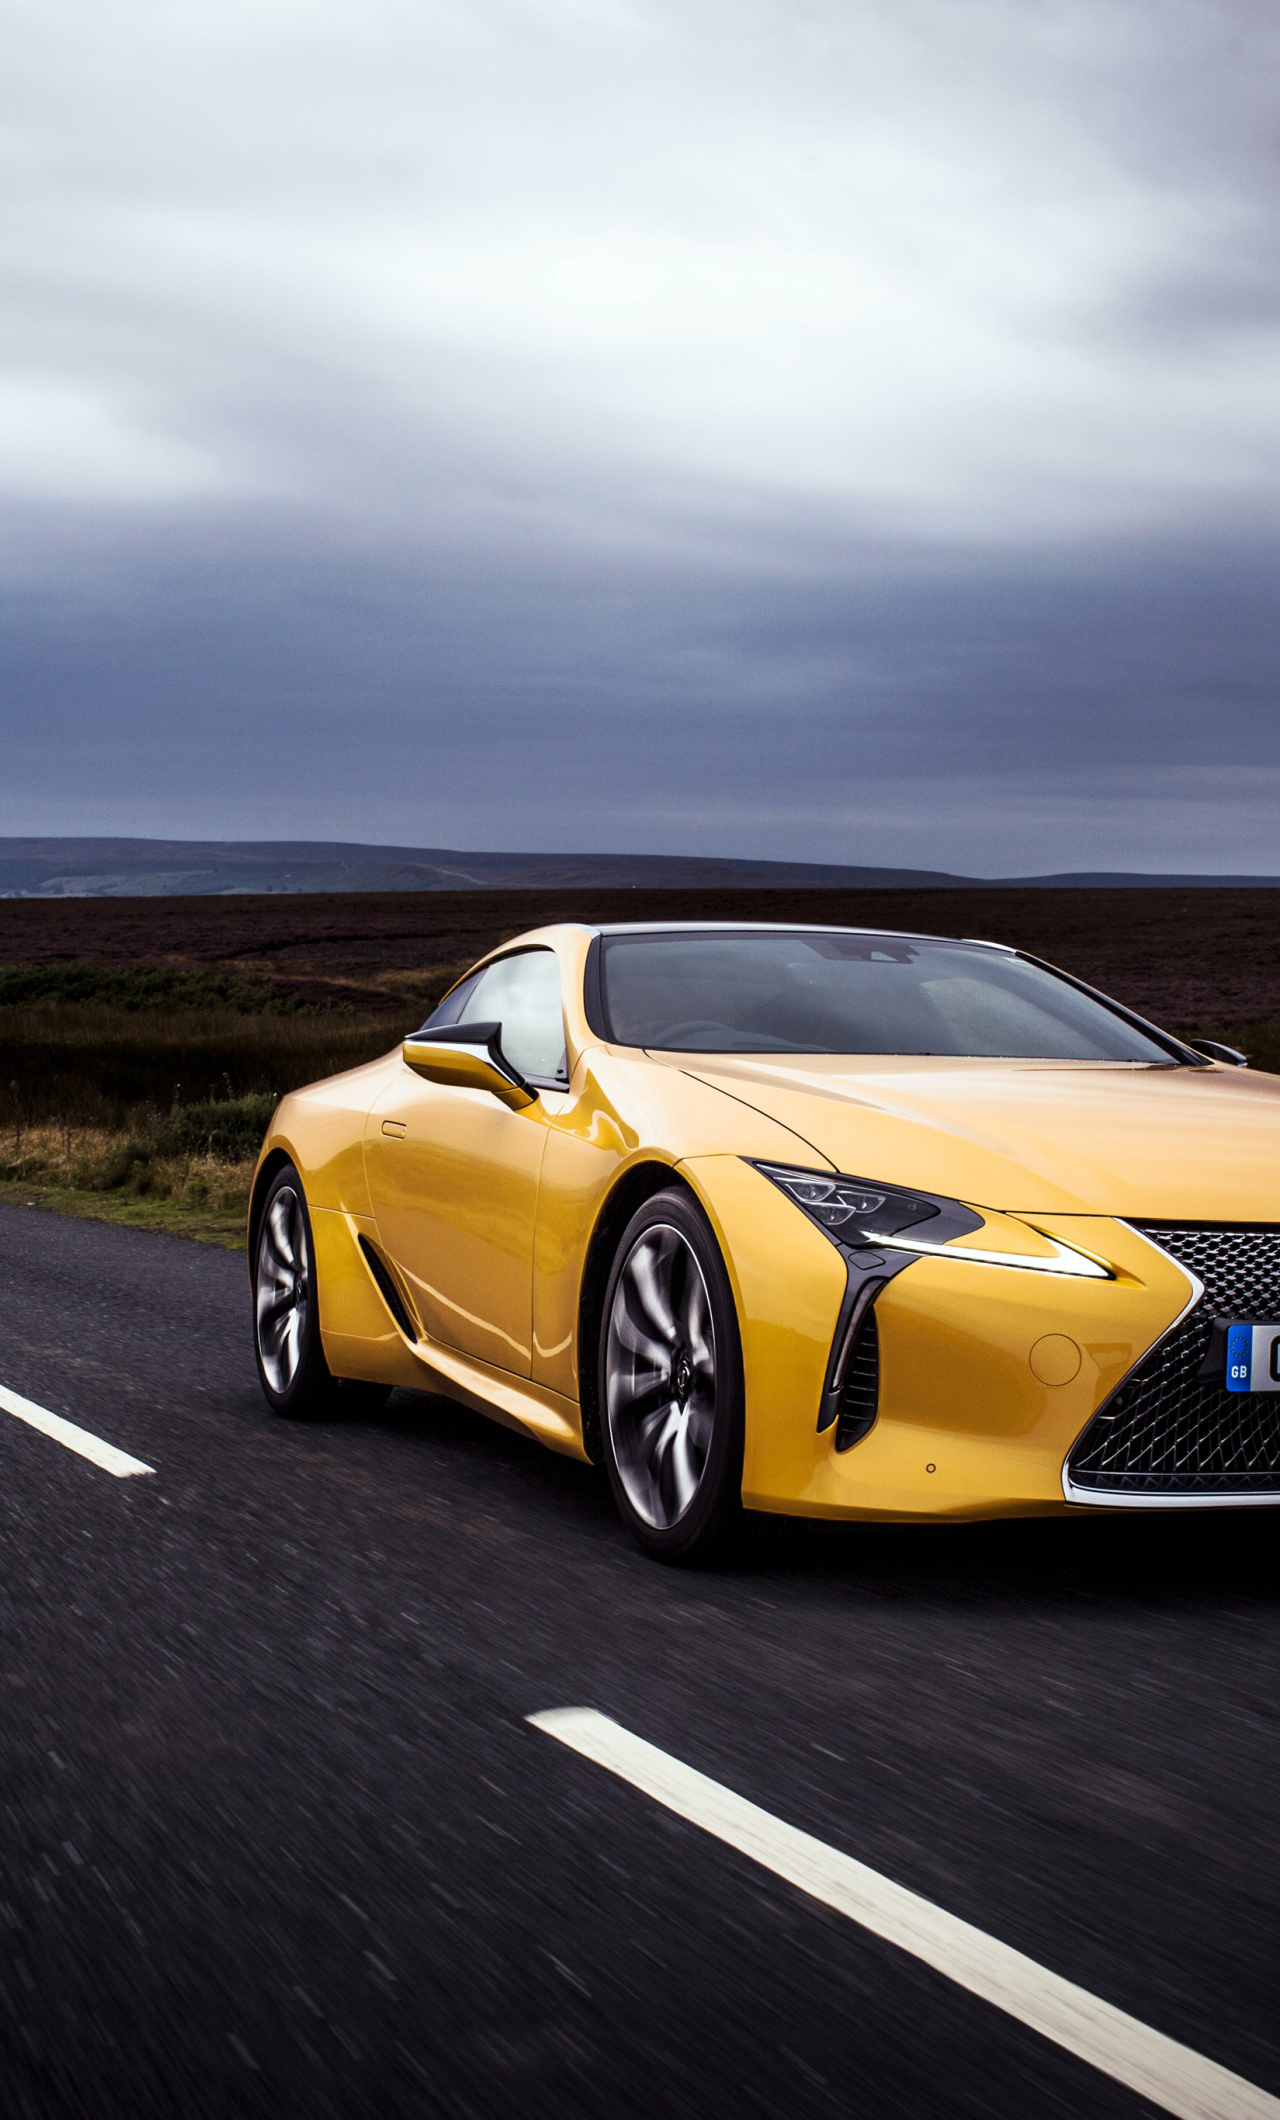 1280x21 17 Lexus Lc 500 Iphone 6 Plus Wallpaper Hd Cars 4k Wallpapers Images Photos And Background